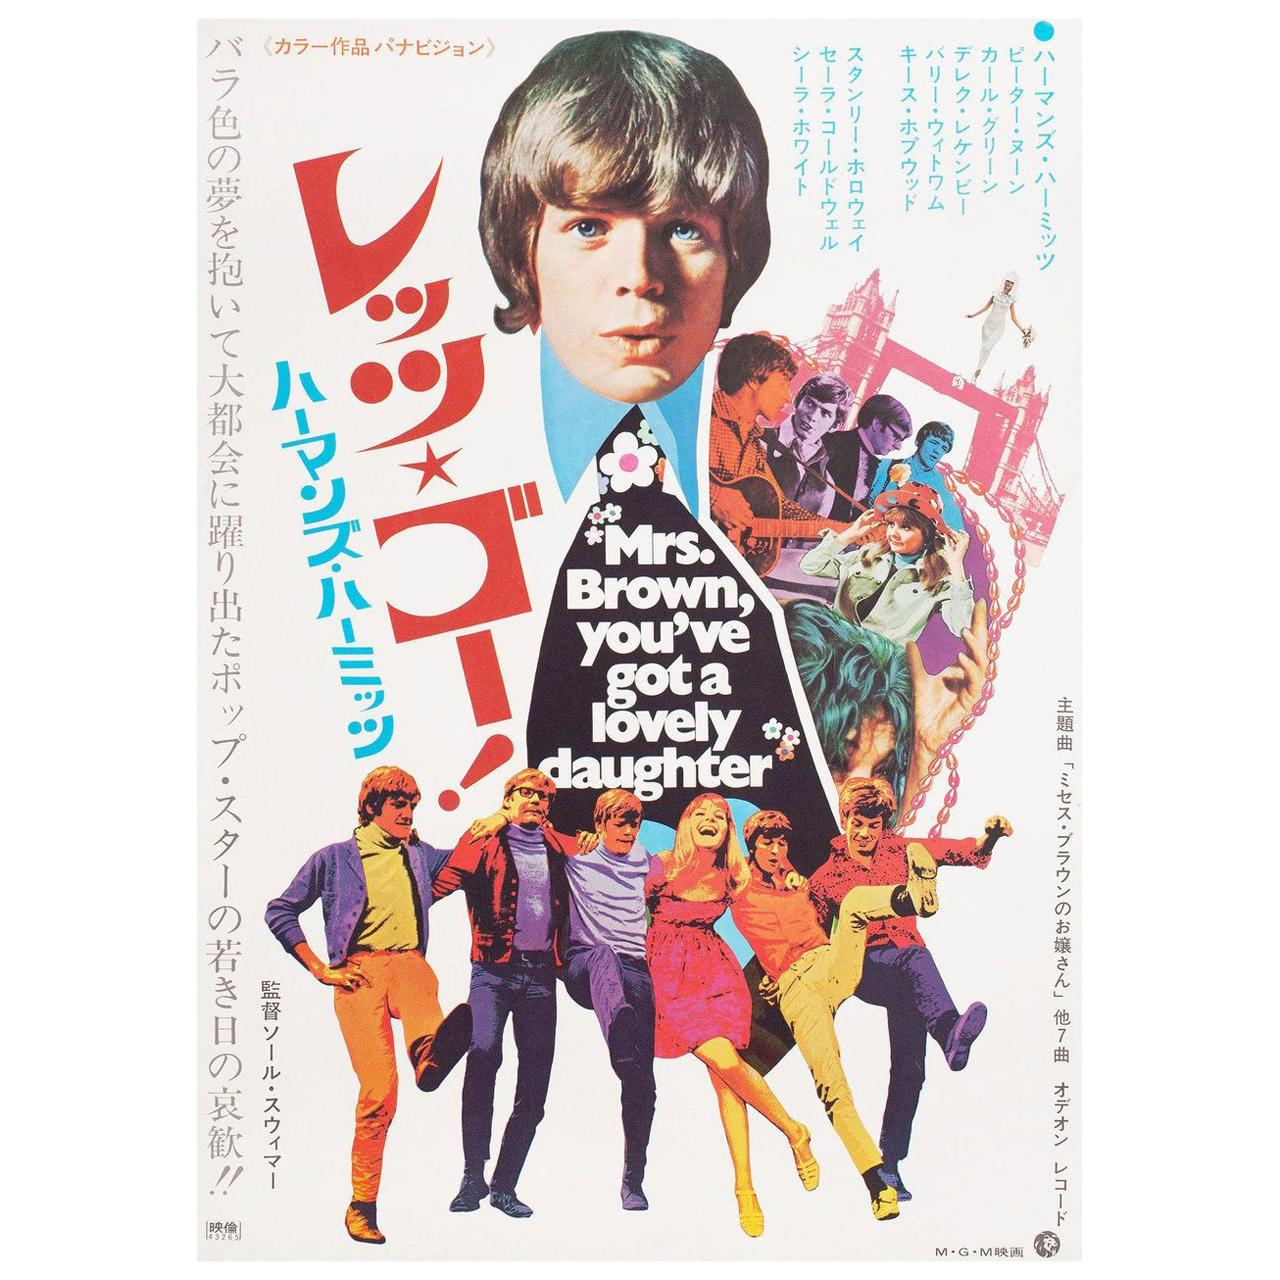 Mrs. Brown, You've Got a Lovely Daughter 1968 Japanese B2 Film Poster For Sale